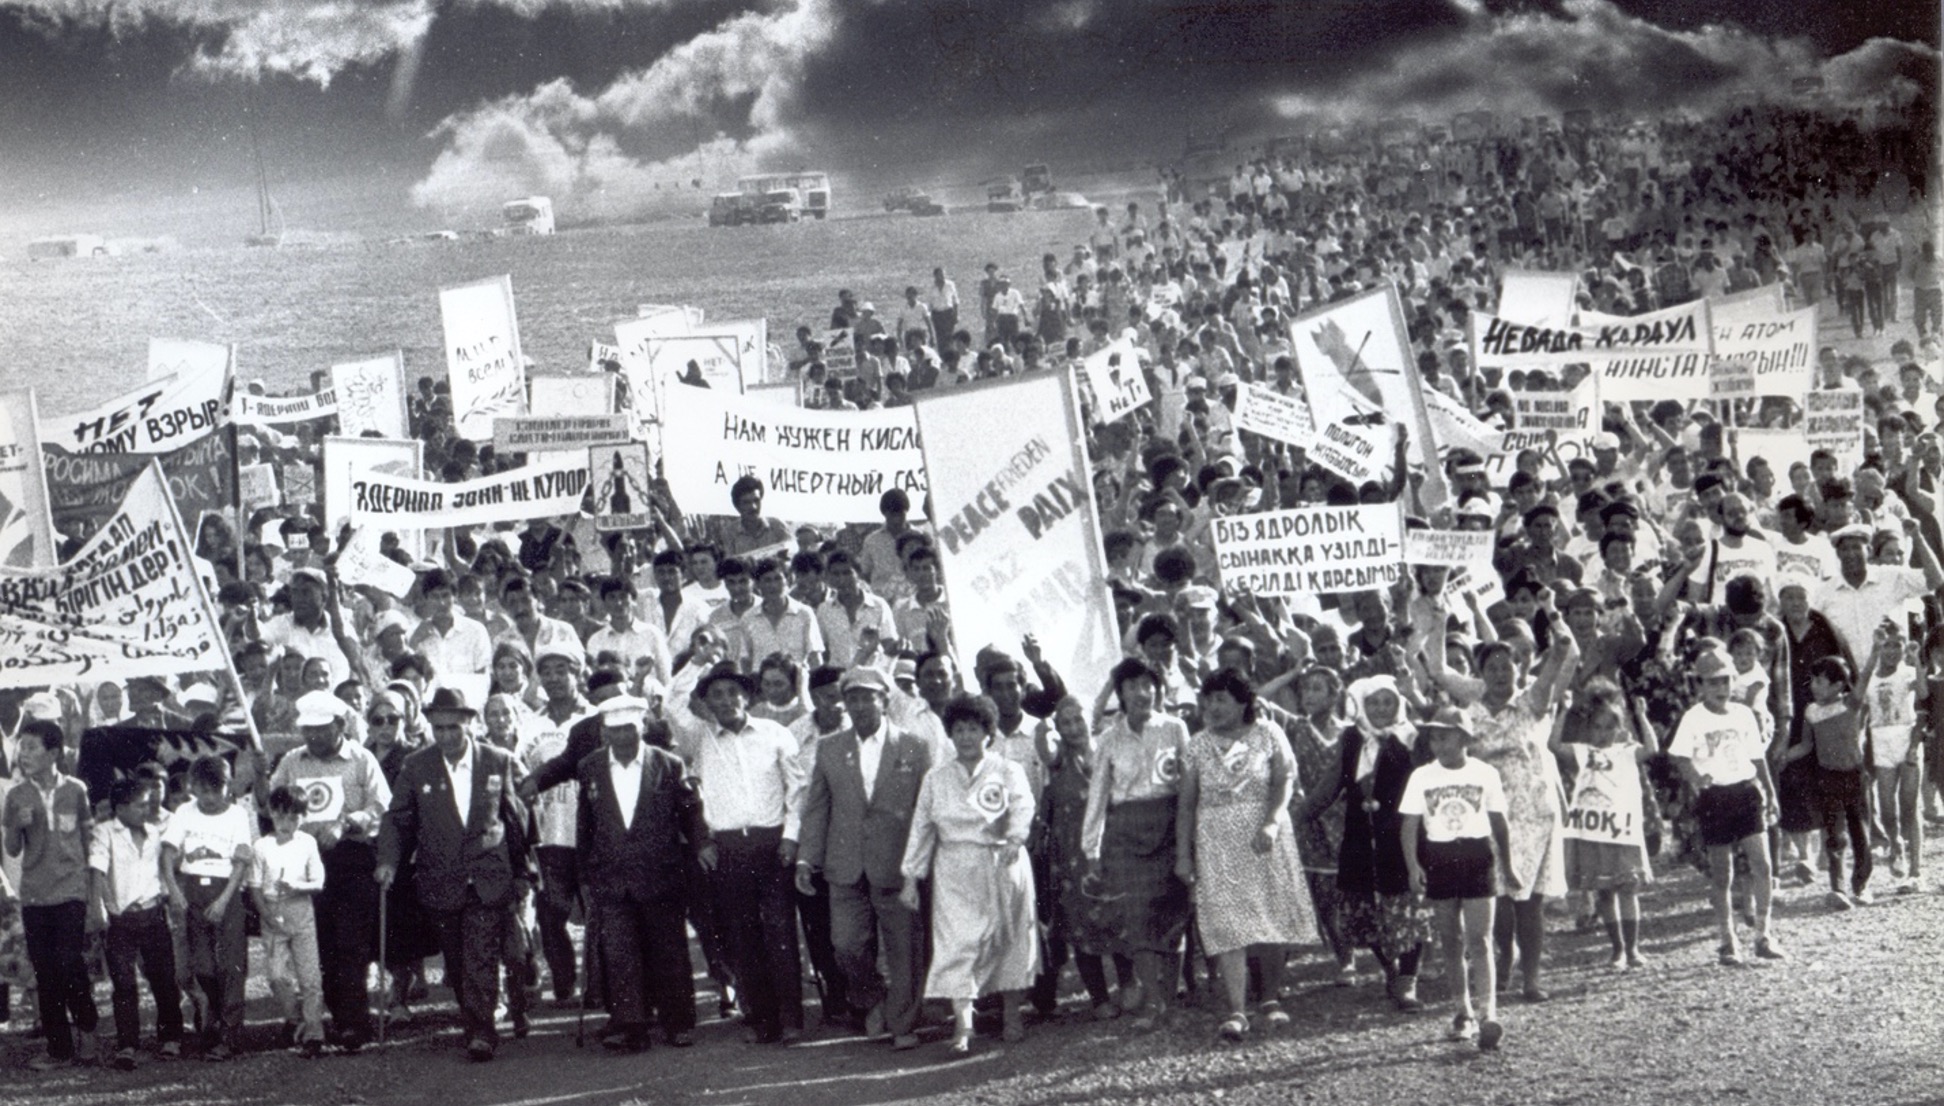 antinuclear protest